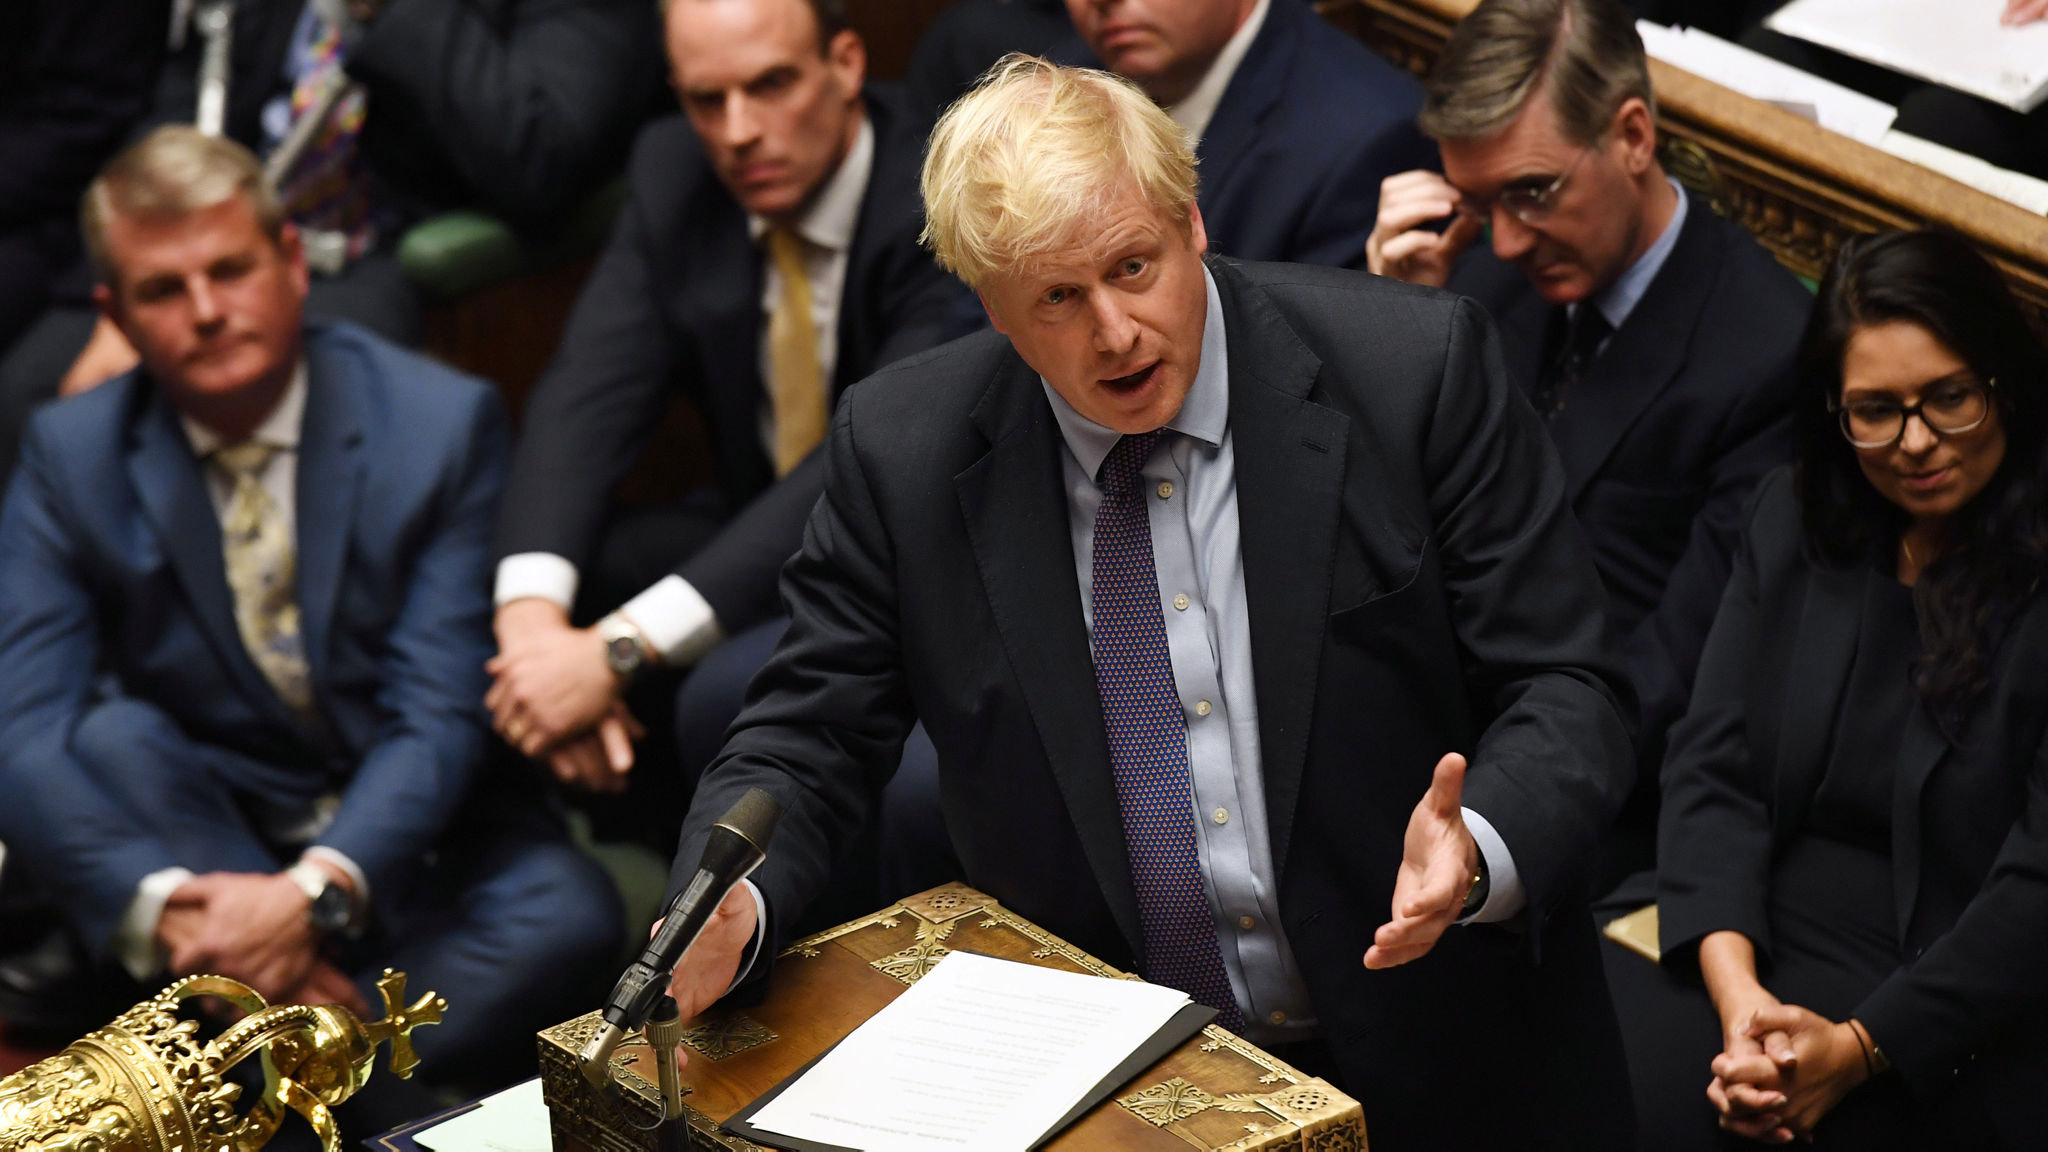 Britain's Prime Minister Boris Johnson is seen at the House of Commons in London, Britain October 22, 2019. ©UK Parliament/Jessica Taylor/Handout via REUTERS ATTENTION EDITORS - THIS IMAGE WAS PROVIDED BY A THIRD PARTY